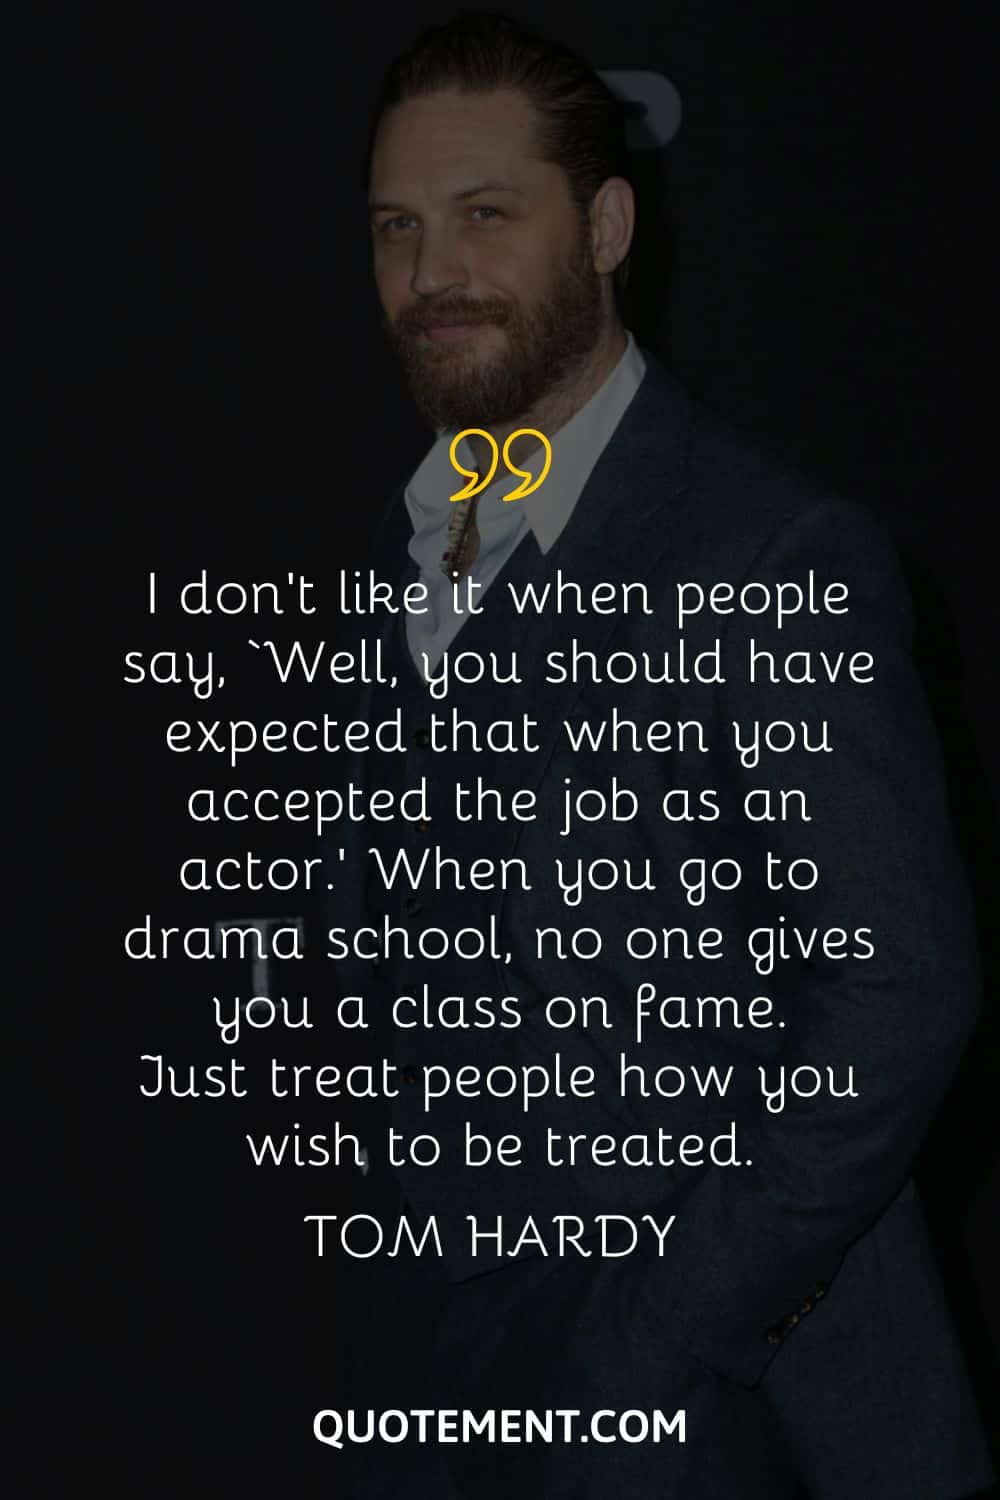 I don’t like it when people say, ‘Well, you should have expected that when you accepted the job as an actor.’